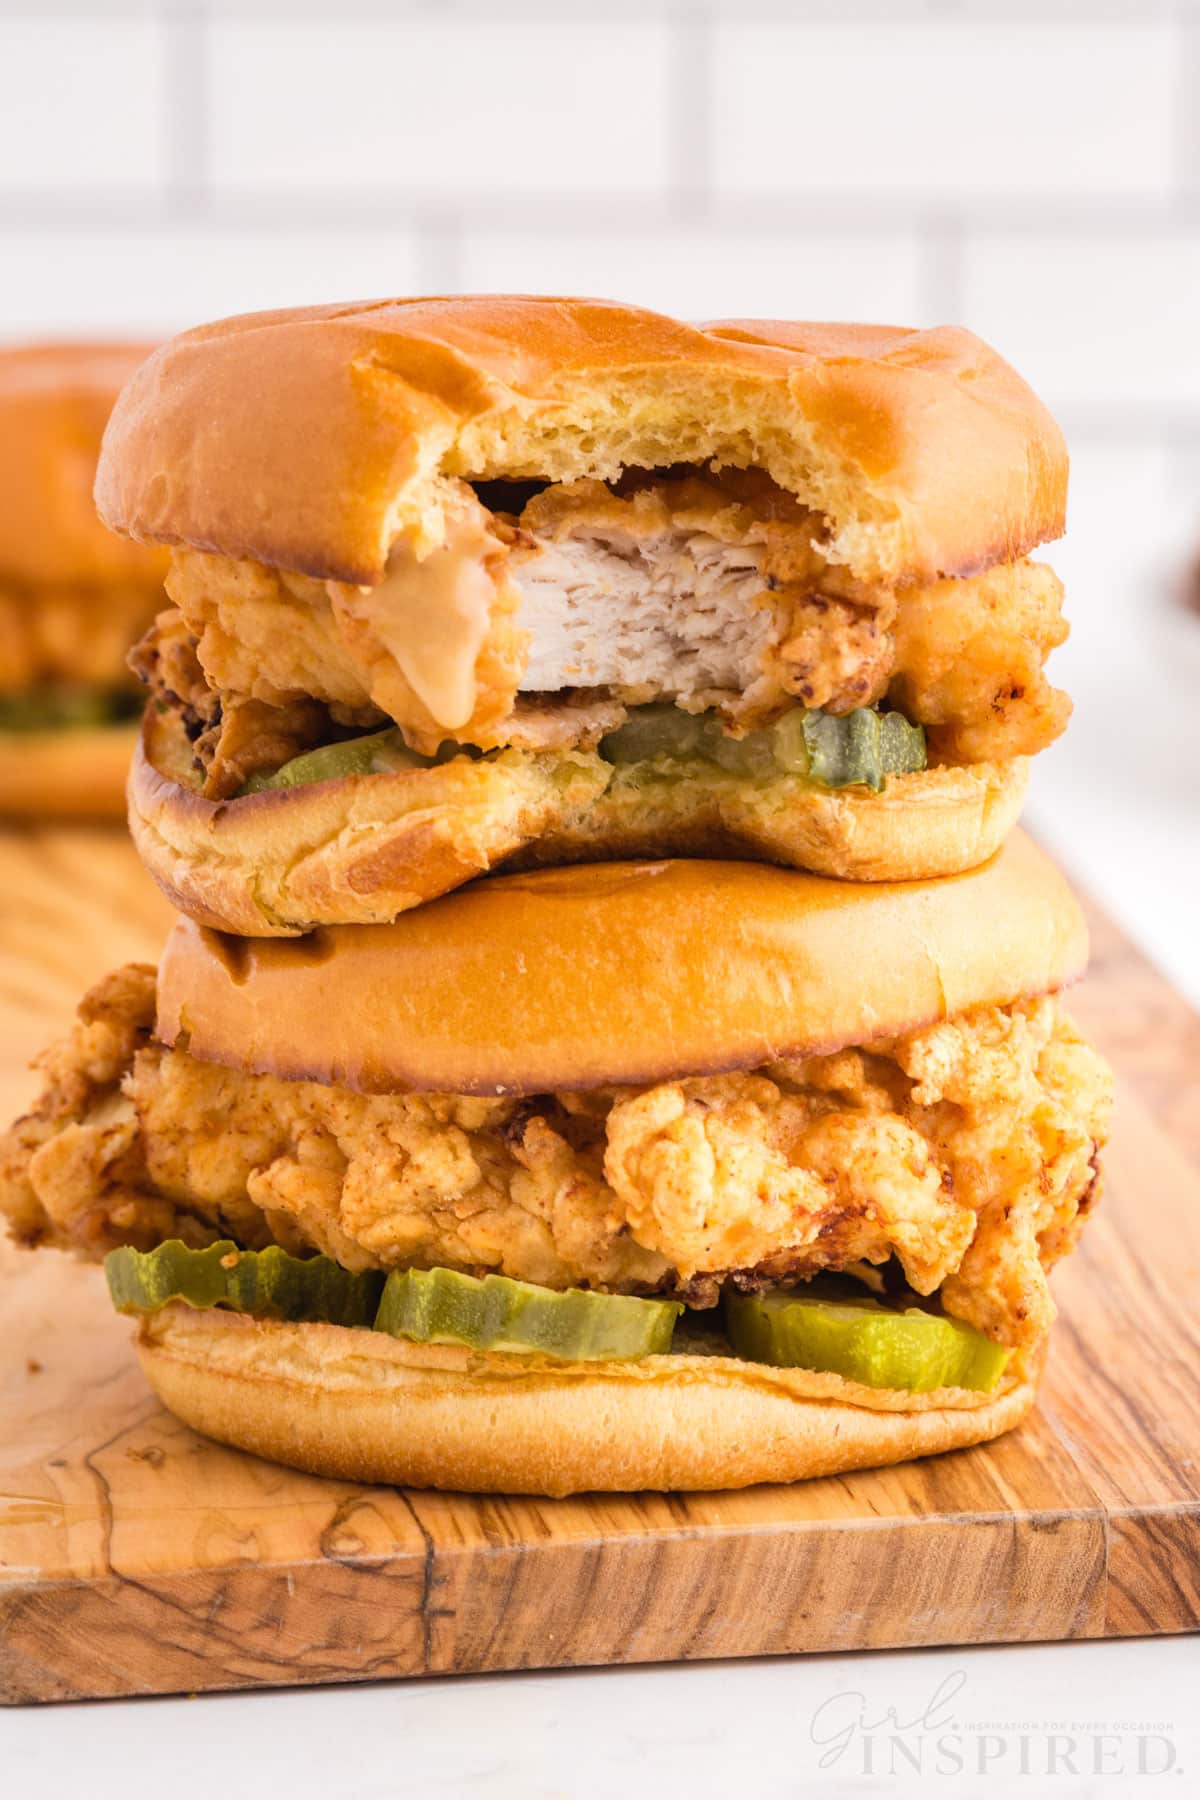 Two Fried Chicken Sandwiches stacked on wooden kitchen board on marble countertop, white subway tiles in the background.